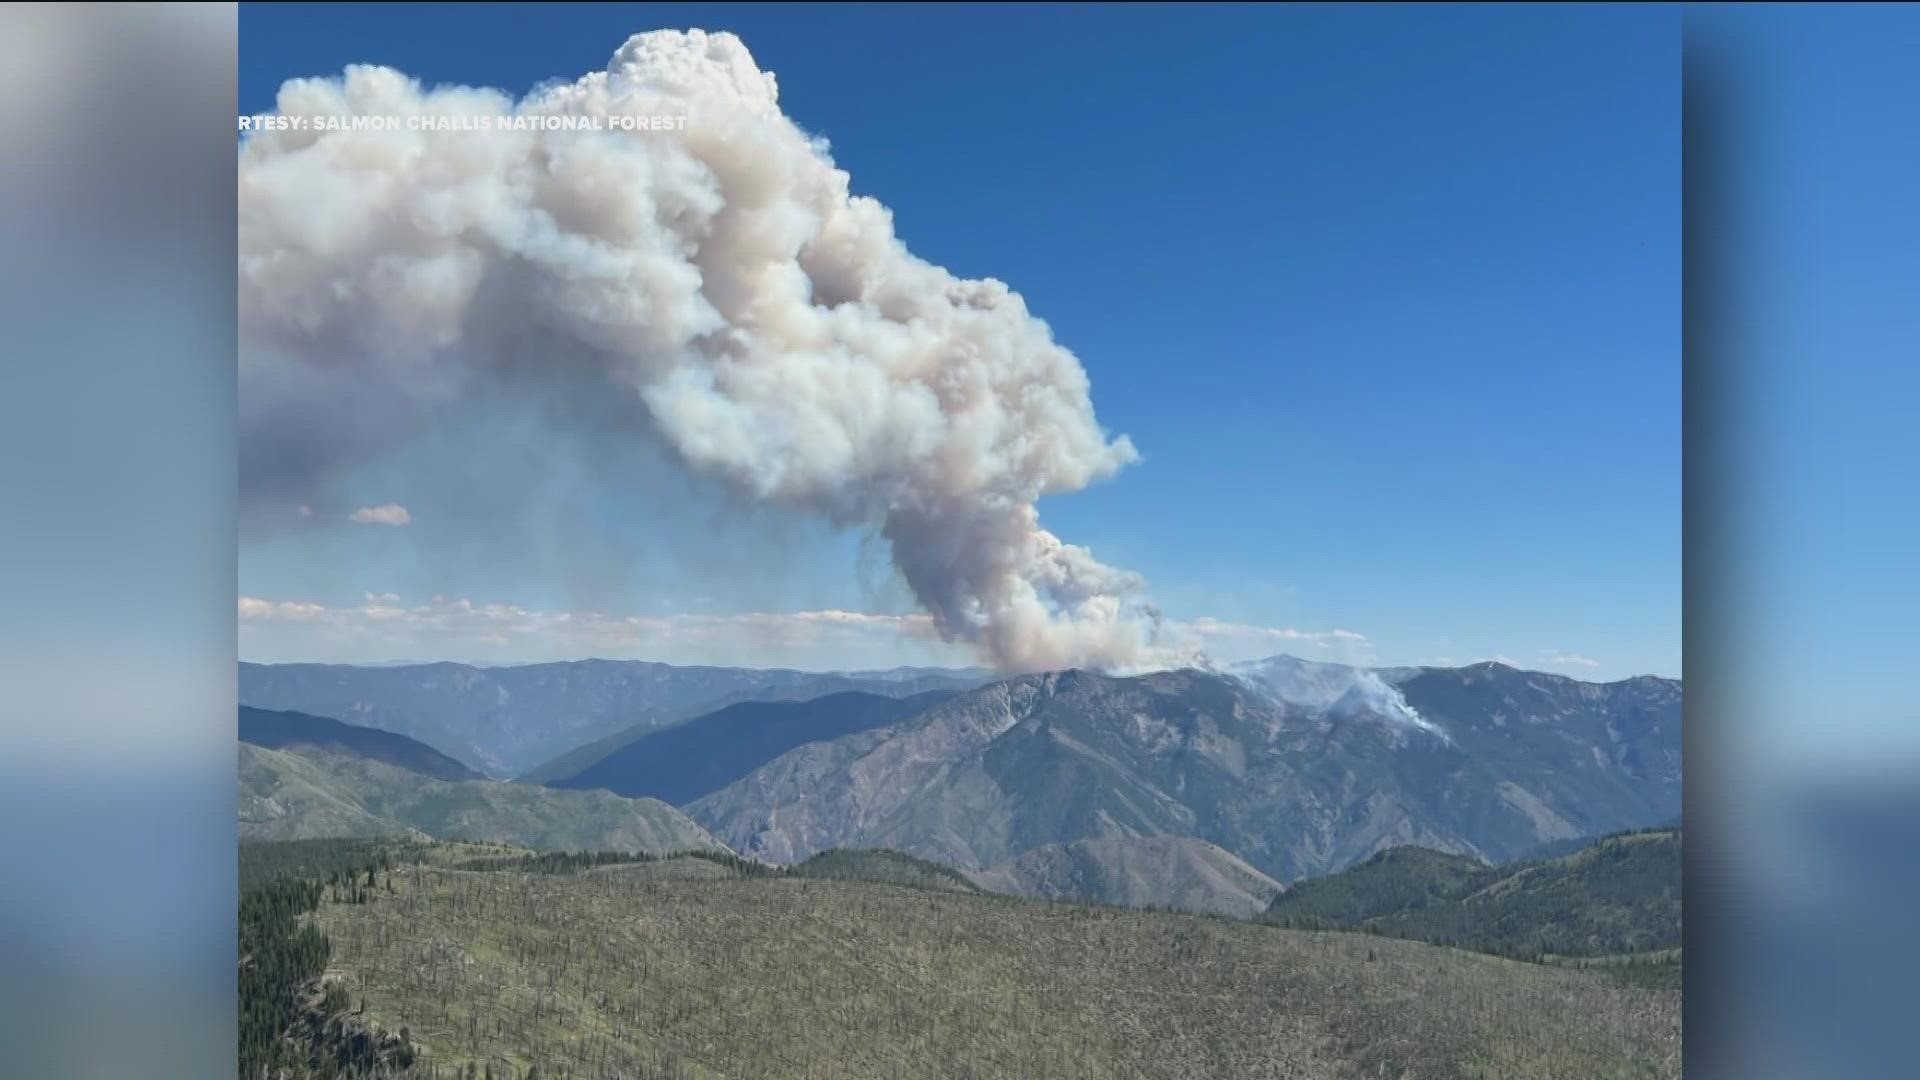 The Woodtick Fire has burned 4,953 acres and was caused by a lightning strike, according to the Salmon-Challis National Forest.